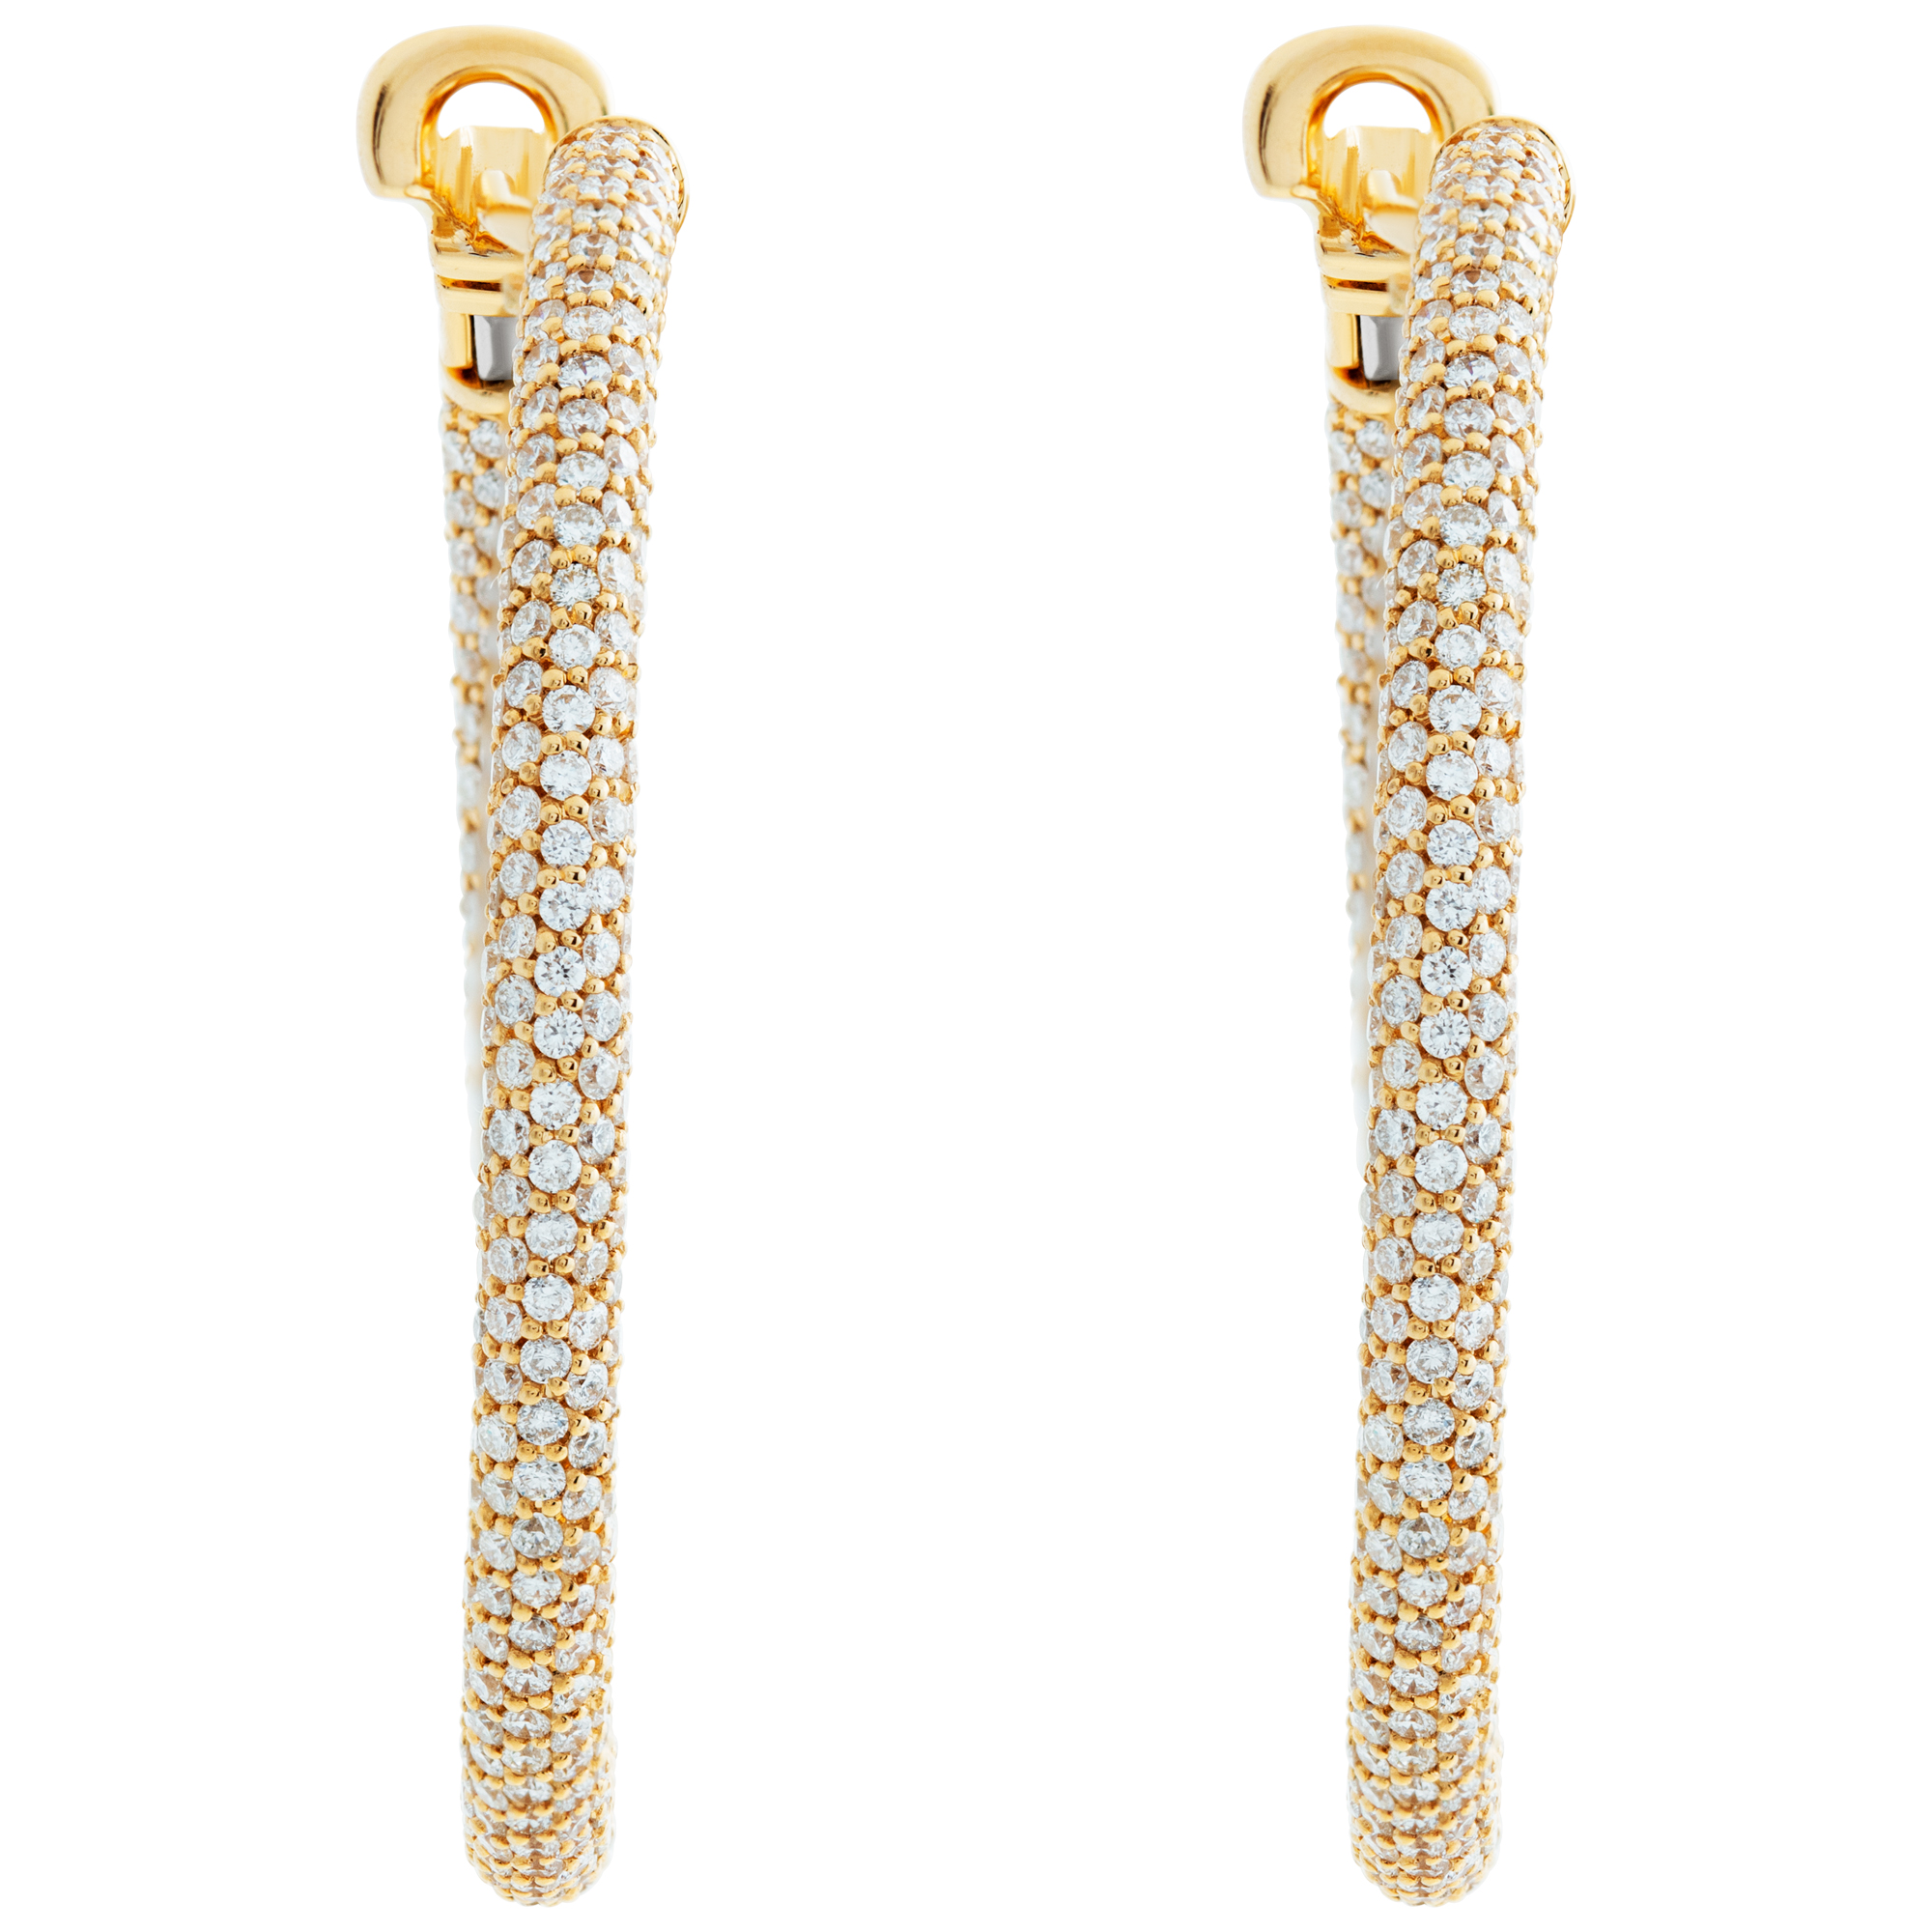 Stunning 18k yellow gold pave hoop earrings with 6.90 carats in round brilliant cut diamonds image 1